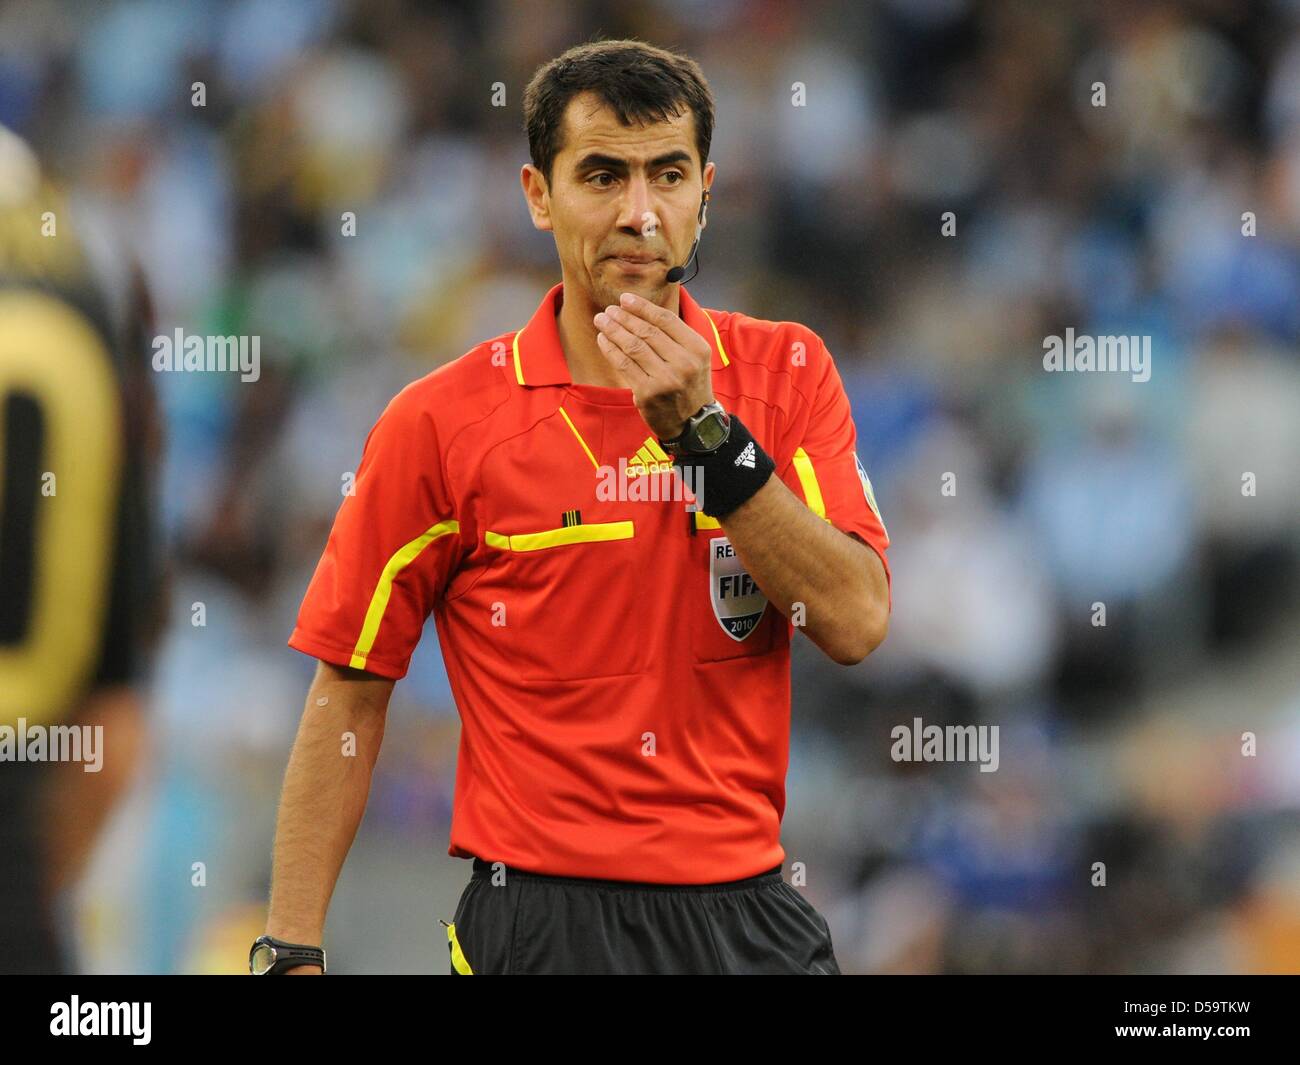 Usbek referee Ravshan Irmatov during the 2010 FIFA World Cup quarterfinal match between Argentina and Germany at the Green Point Stadium in Cape Town, South Africa 03 July 2010. Germany won 4-0. Photo: Marcus Brandt dpa - Please refer to http://dpaq.de/FIFA-WM2010-TC Stock Photo